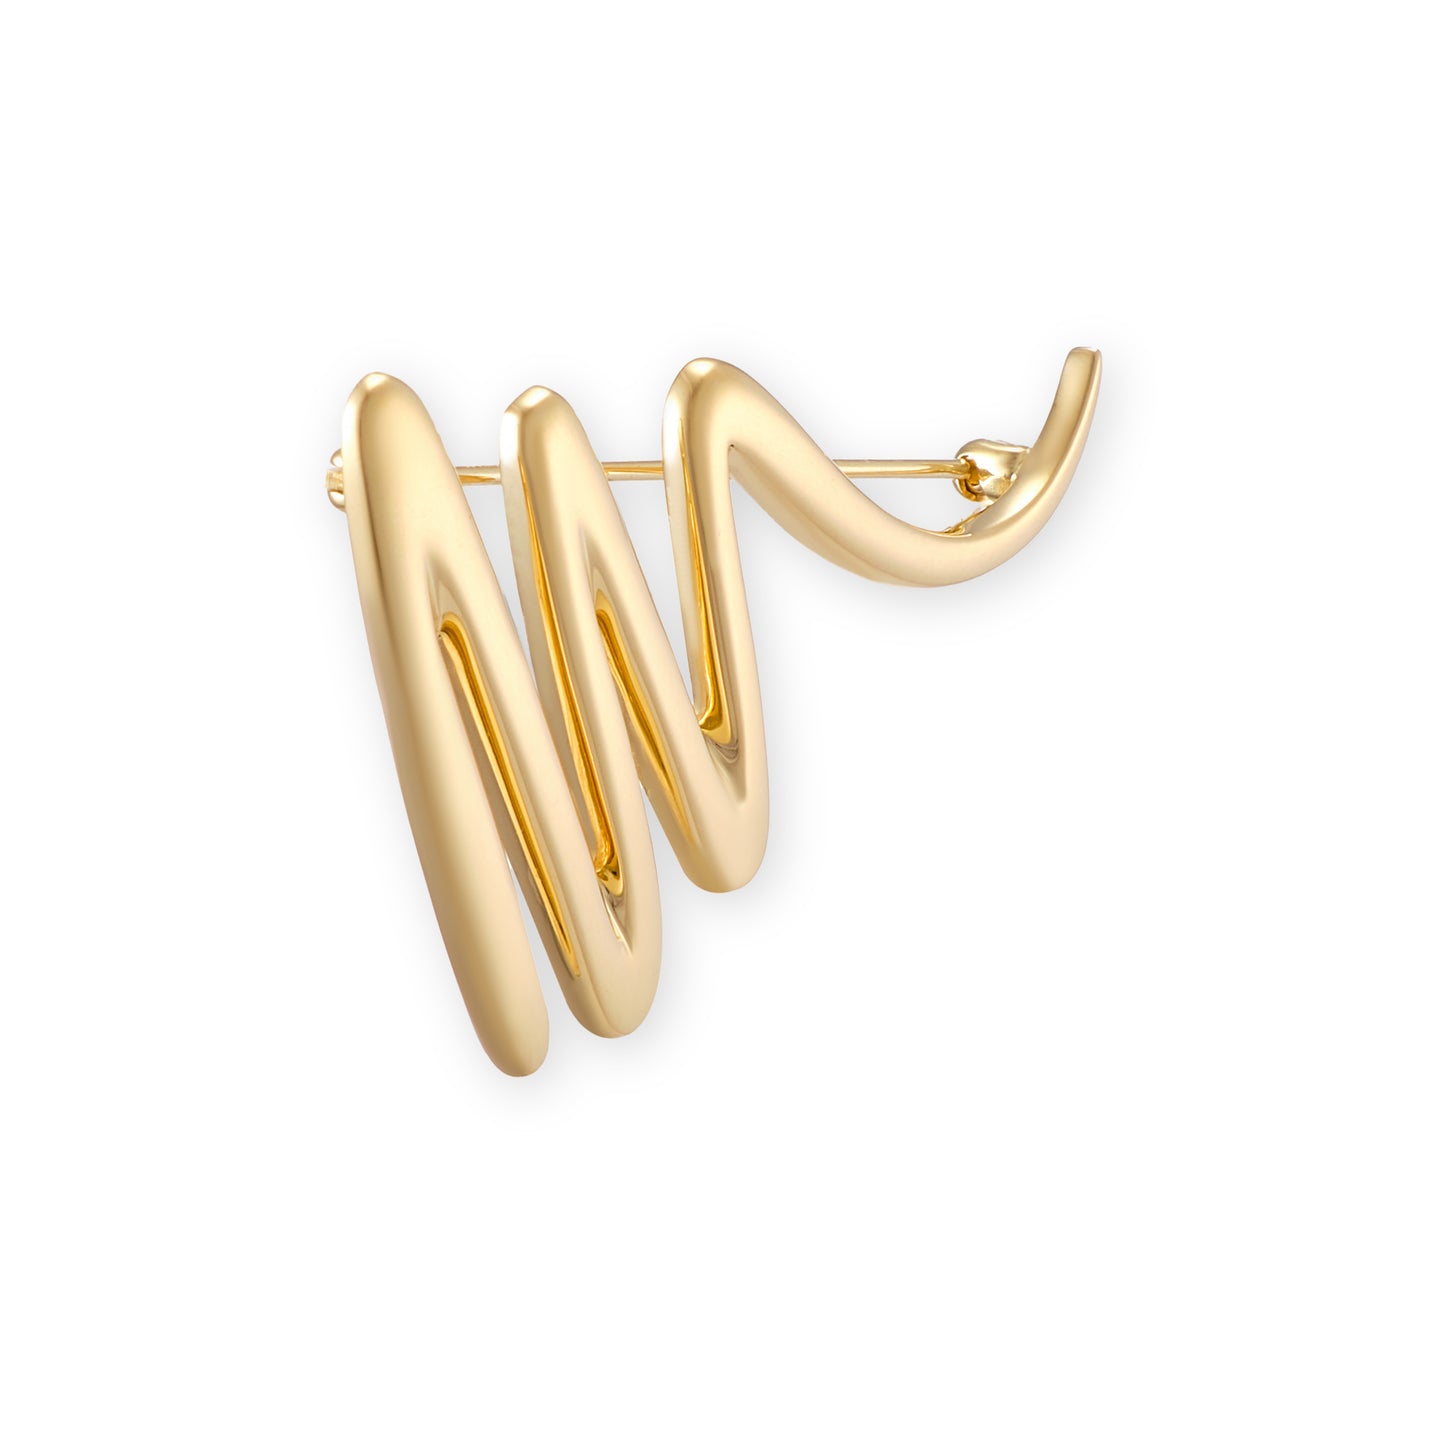 Paloma Picasso for Tiffany & Co. 'Scribble' Brooch